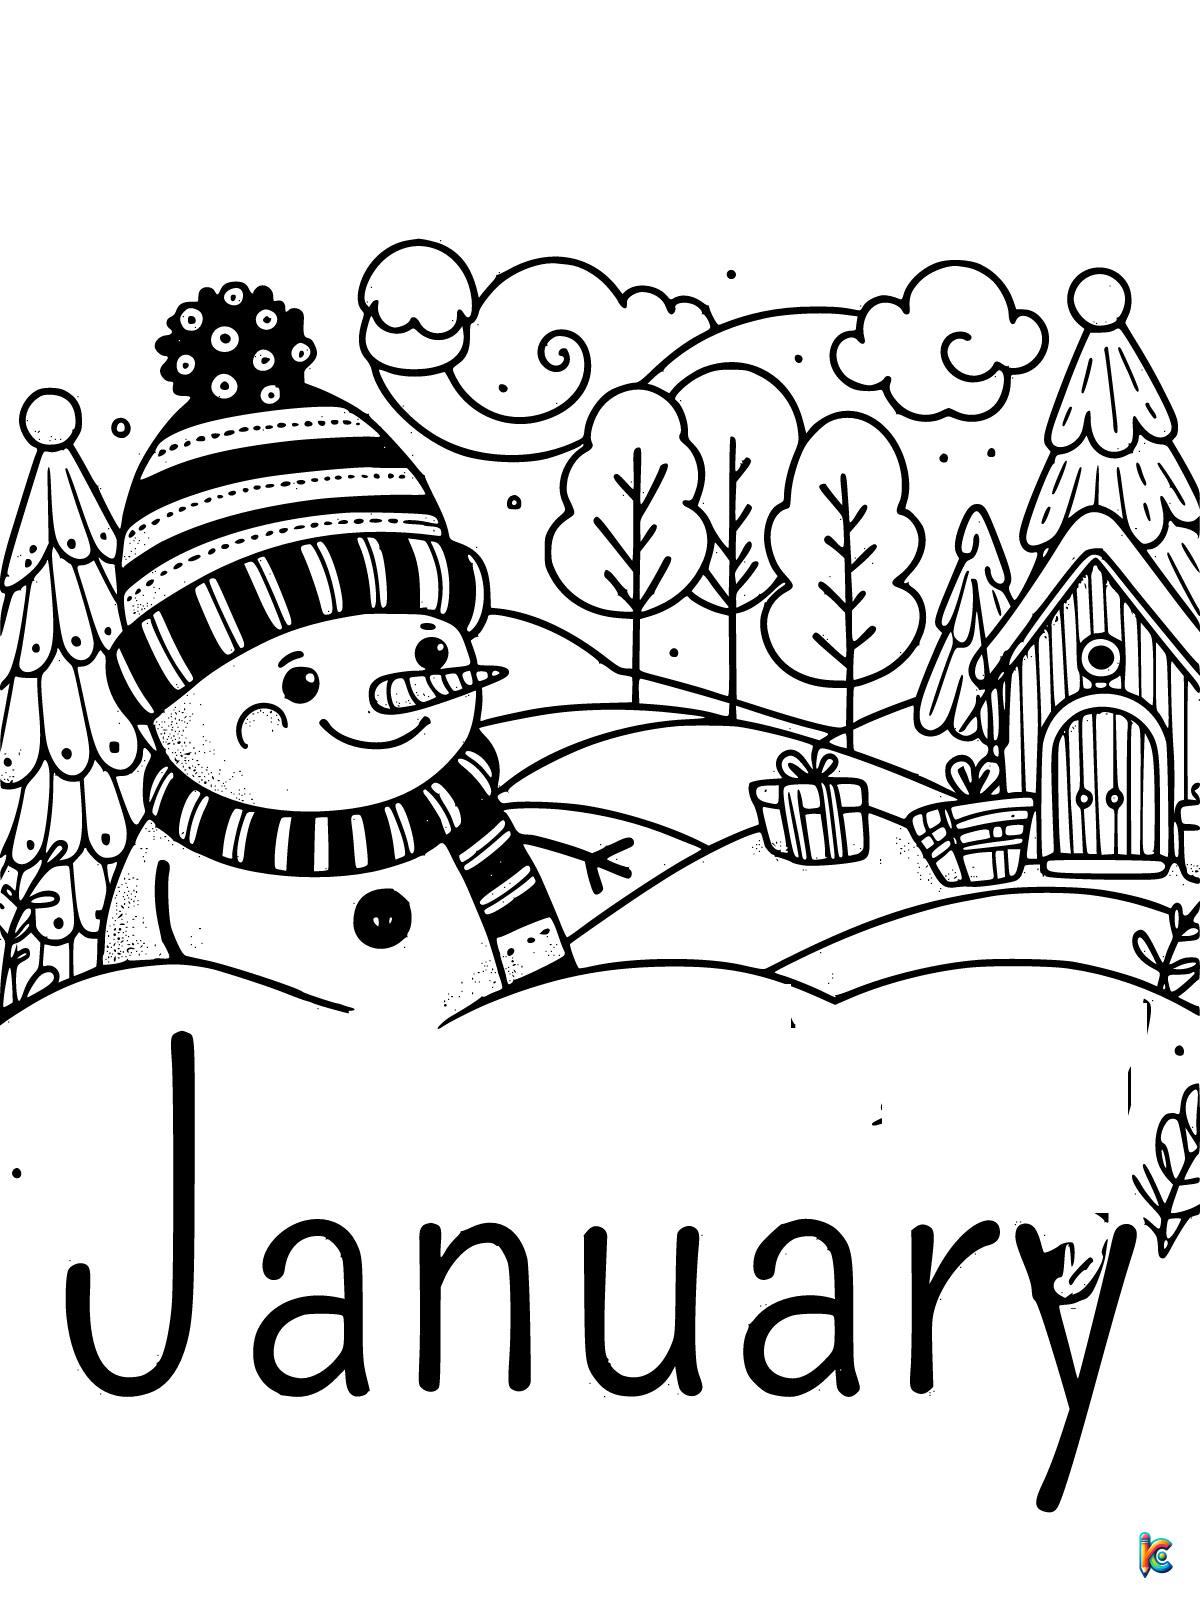 January Coloring Pages – ColoringPagesKC